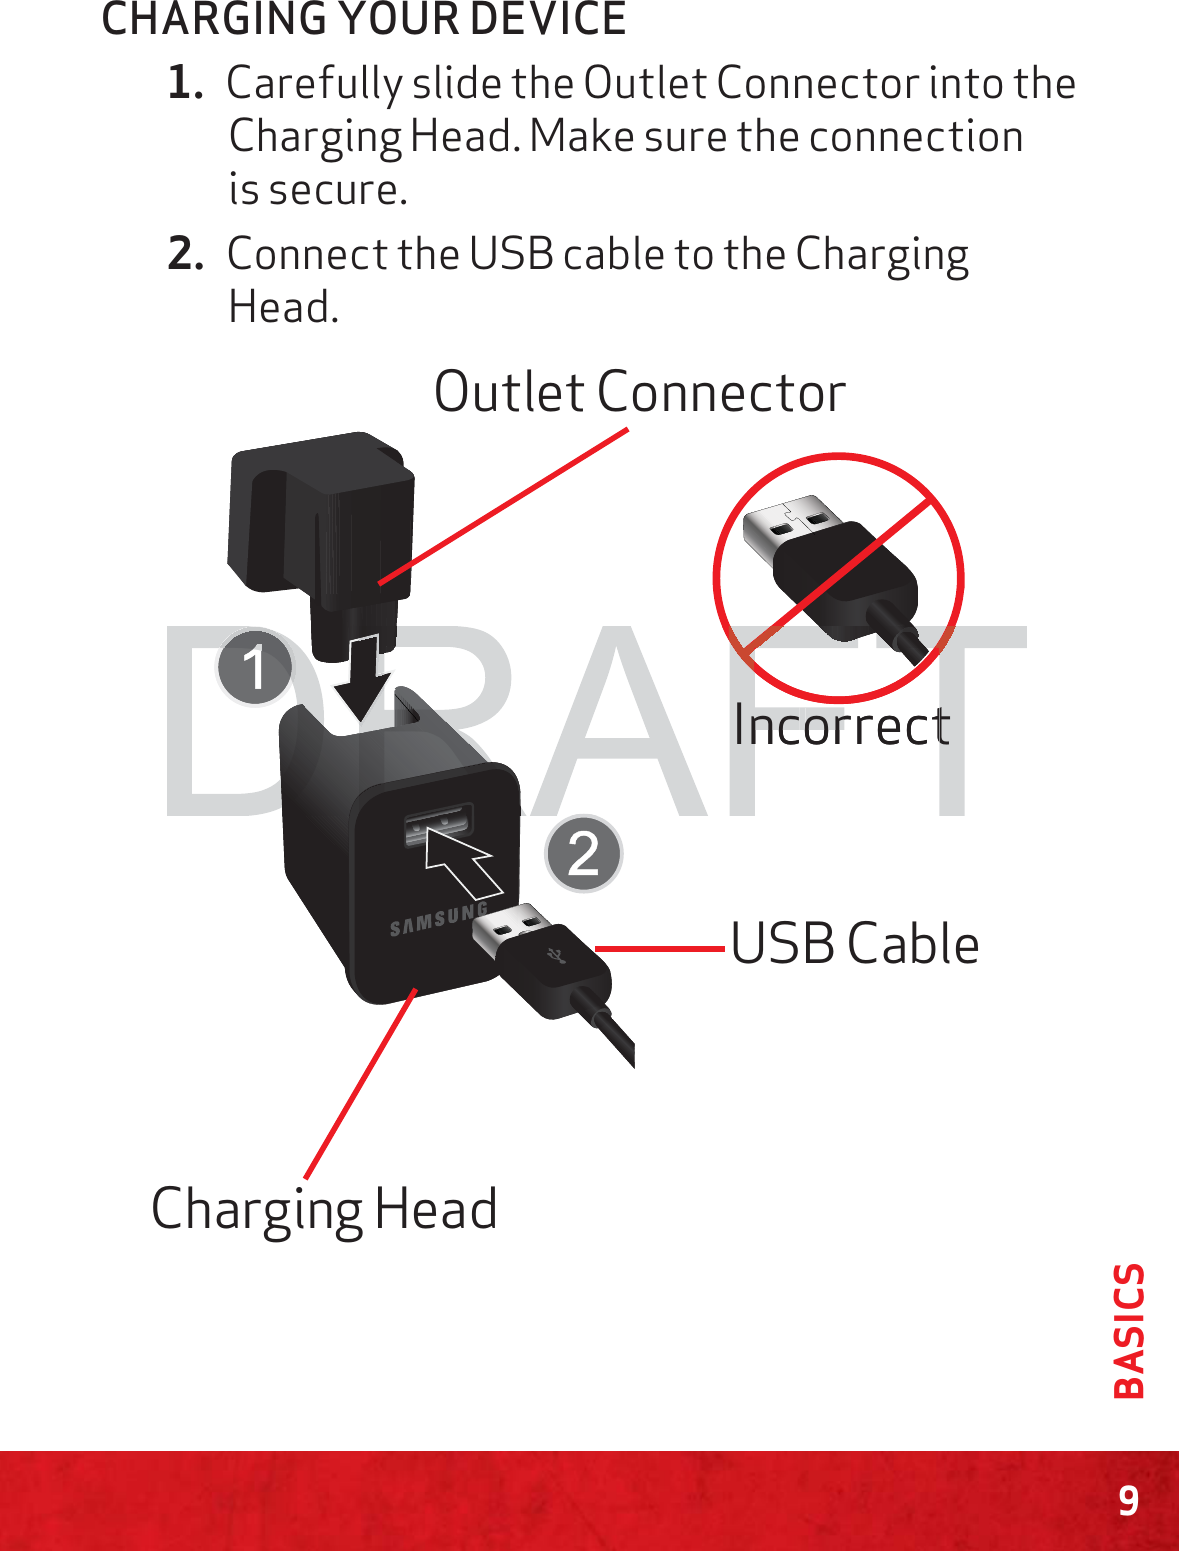 9BASICSCHARGING YOUR DEVICE1. Carefully slide the Outlet Connector into the Charging Head. Make sure the connection is secure.2. Connect the USB cable to the Charging Head.Charging HeadOutlet ConnectorUSB CableIncorrectFFFFFFFFFFFFFFFFFFFFFFFTTTTTTTTTTTTTTTTTTTTTTTTTTTTTTTTTTTTTTTTTTTTTTTTTTTTTTTTTTTTTTTTTTTTTTTTTTTTTTTTTTTTTTTTTTTTTTTTTTTTTTTTTTTTTTTTTTTTTTTTTTTFTDRRRRRRRRRRRRRRRRRRRRRRRRRRRRRRRRRRRRRRRRRRRRRRRRRRRRRRRRRRRRRRRRRRRRRRRRRRRRRRRRRRRRRRRRRRRRRRRRRRRRRRRRRRRRRRRDRDRDRDRDRDRDRDRDRDRDRDRDRDDDDDDDDDDDDDDDDDDDDDDDDDDDDDDDRRRRRRRRRRRRRRRRRRRRRRRRRRRRRRRRRRRRRRRRRRRRRRRRRRRRRRRRRRRRRRRRRRRRRRRRRRRRRRRRRRRRRRRRRRRRRRRRRRRRRRRRRRRRRRRRRRRRRRRRRRRRRRRRRRRRRRRRRRRRRADDDDIncIncorrectorrect